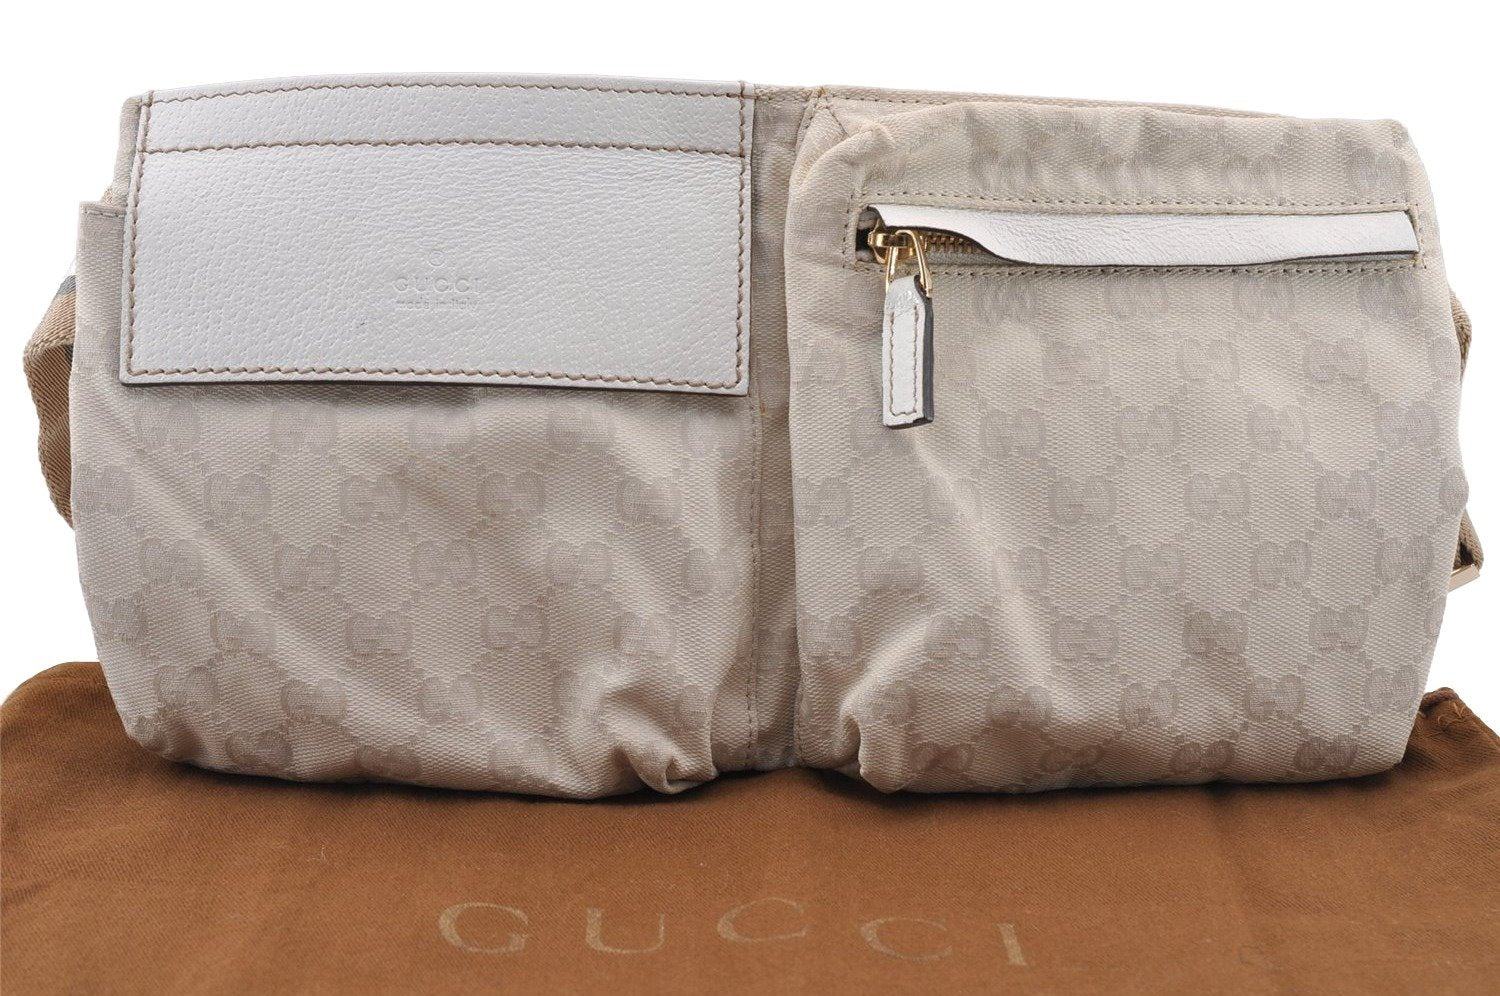 Authentic GUCCI Vintage Waist Body Bag Purse GG Canvas Leather 28566 White 4029I